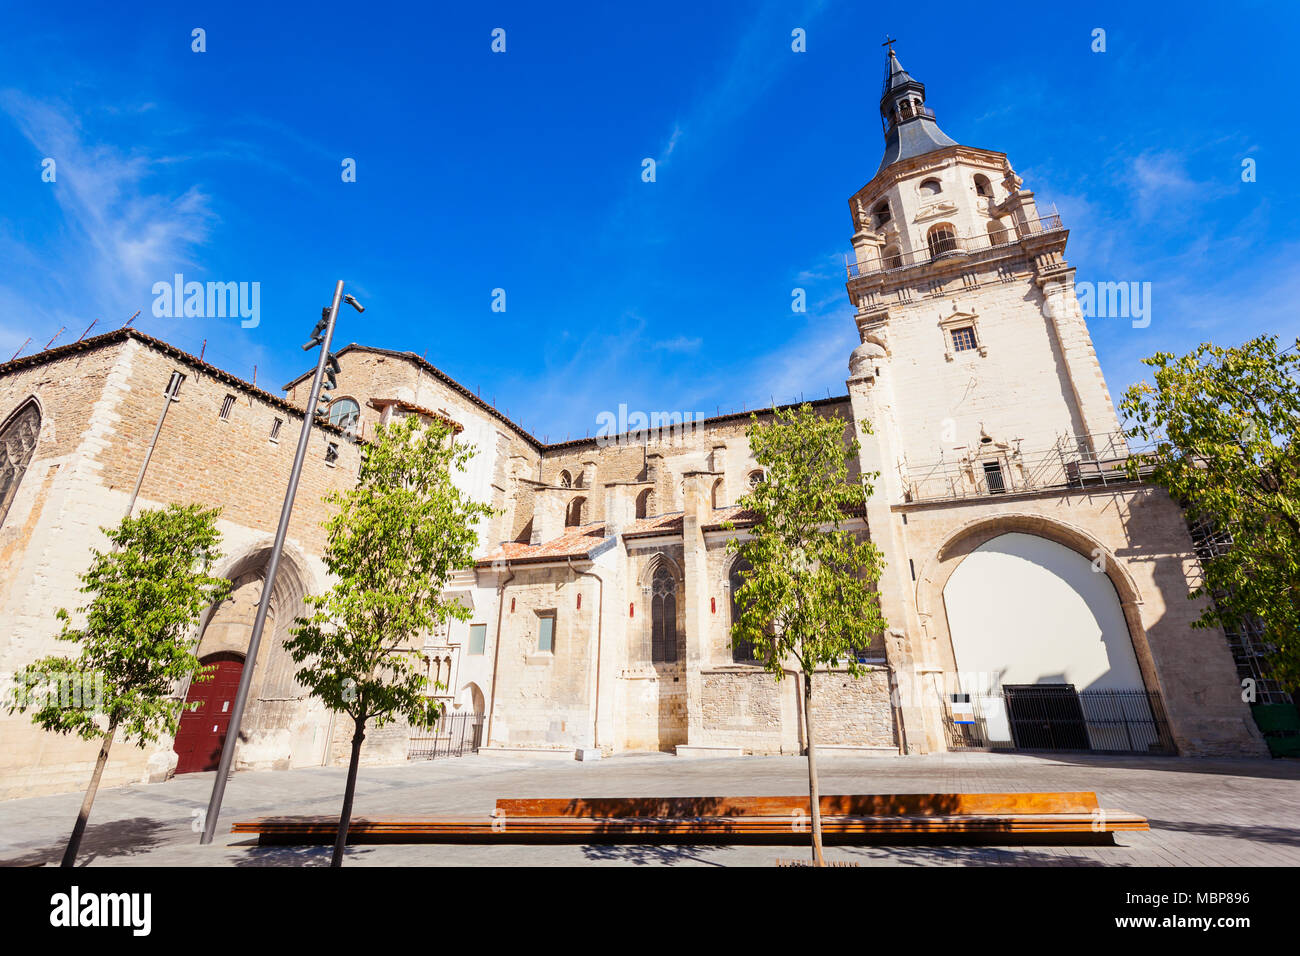 Cathedral of Santa Maria de Vitoria is a gothic style roman catholic cathedral located in Vitoria-Gasteiz, Basque country, Spain Stock Photo